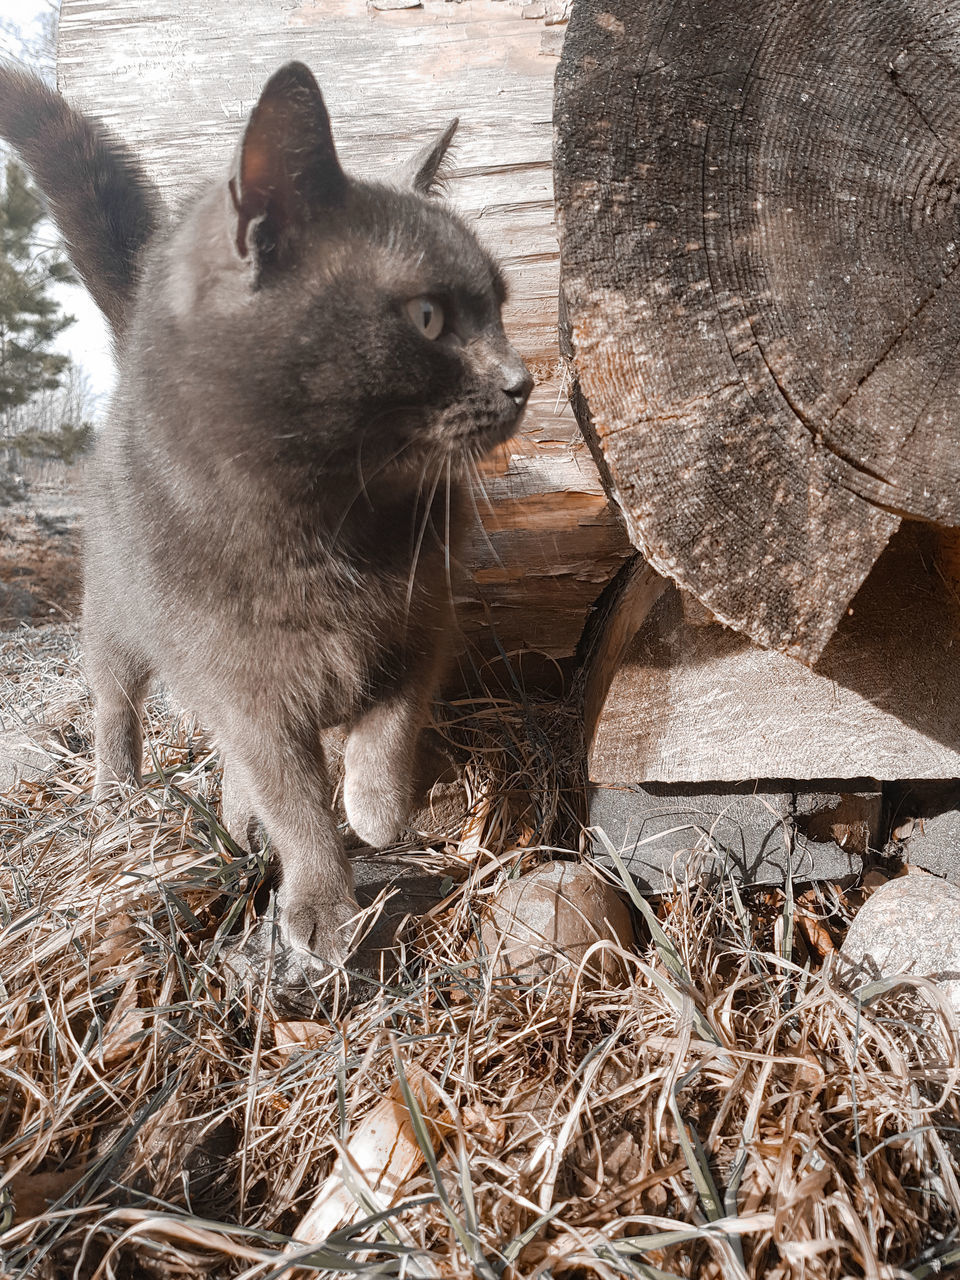 VIEW OF A CAT ON WOOD